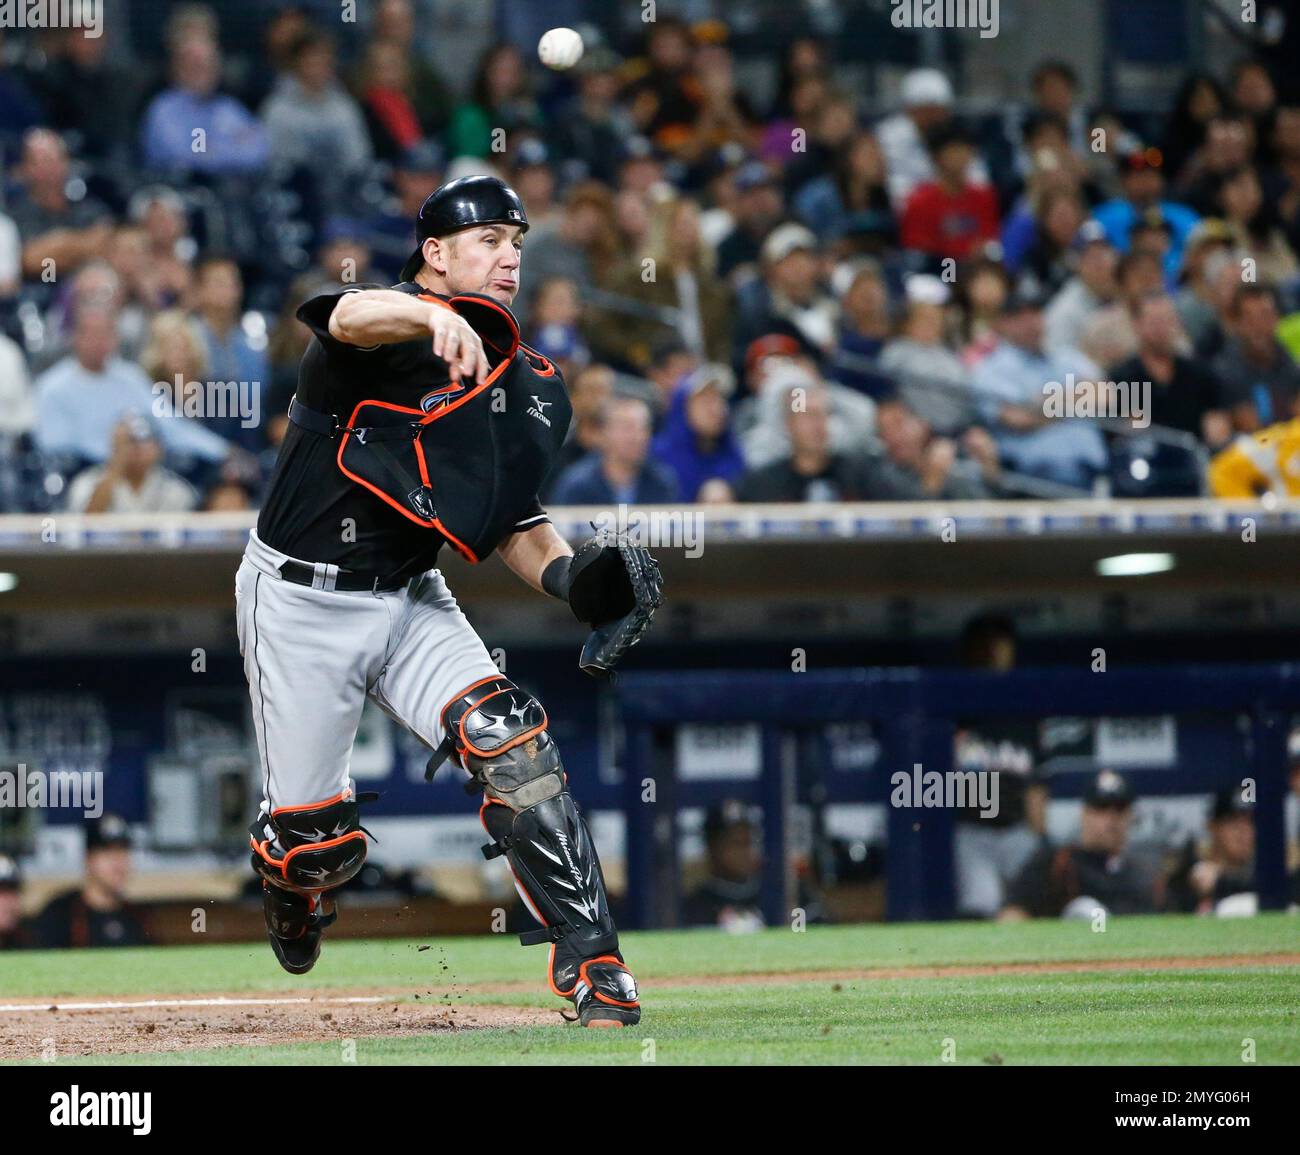 Miami Marlins catcher Jeff Mathis throws to first to put out San